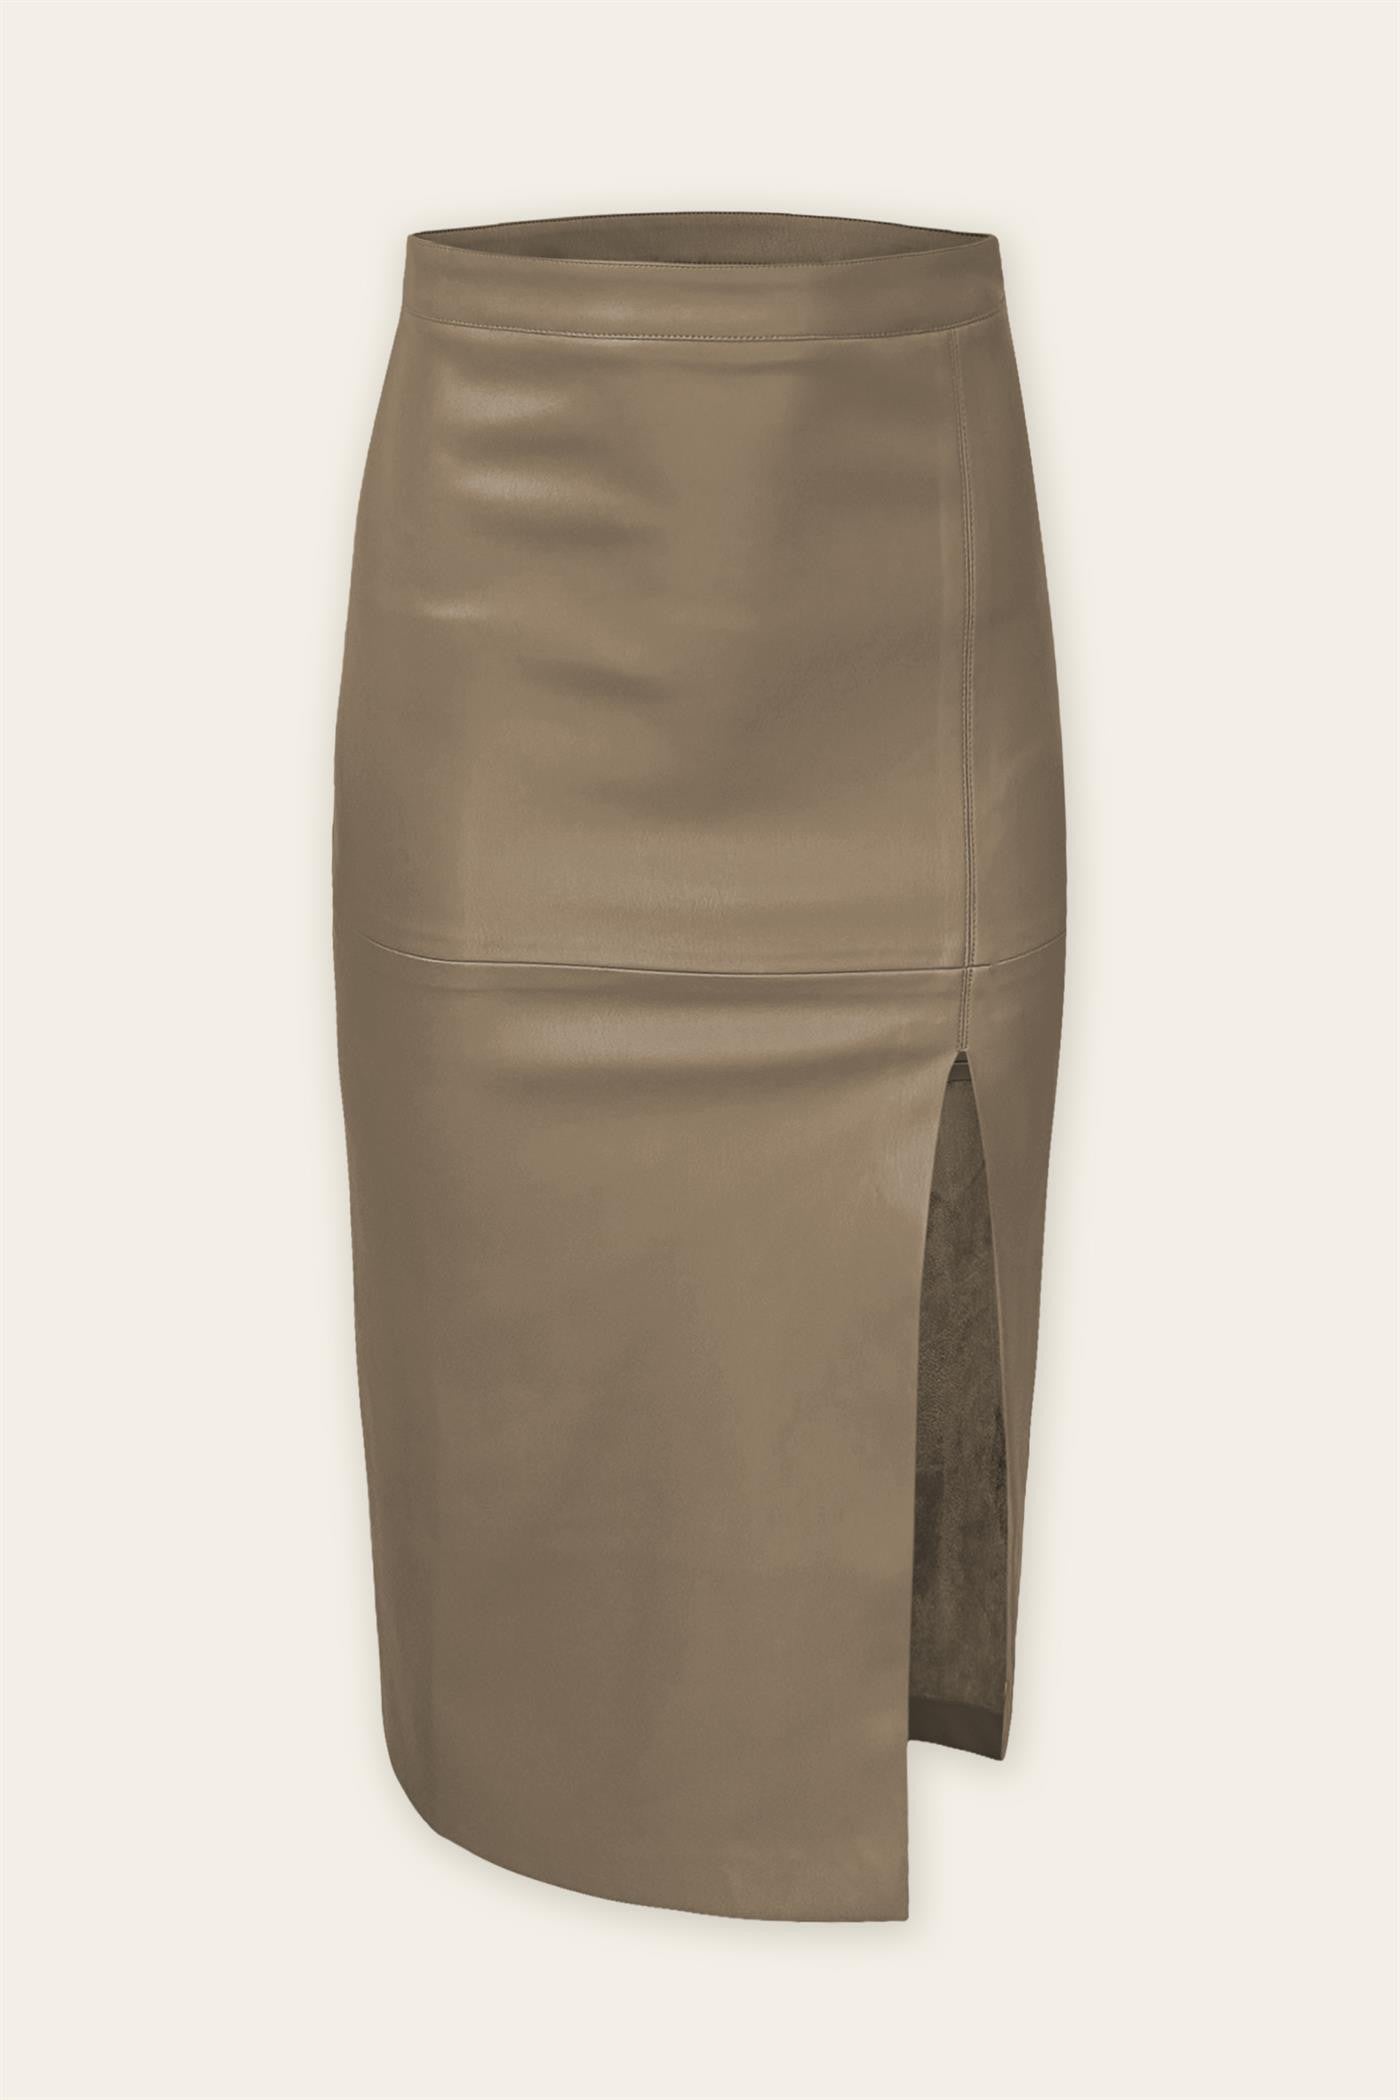 polly faux leather midi skirt